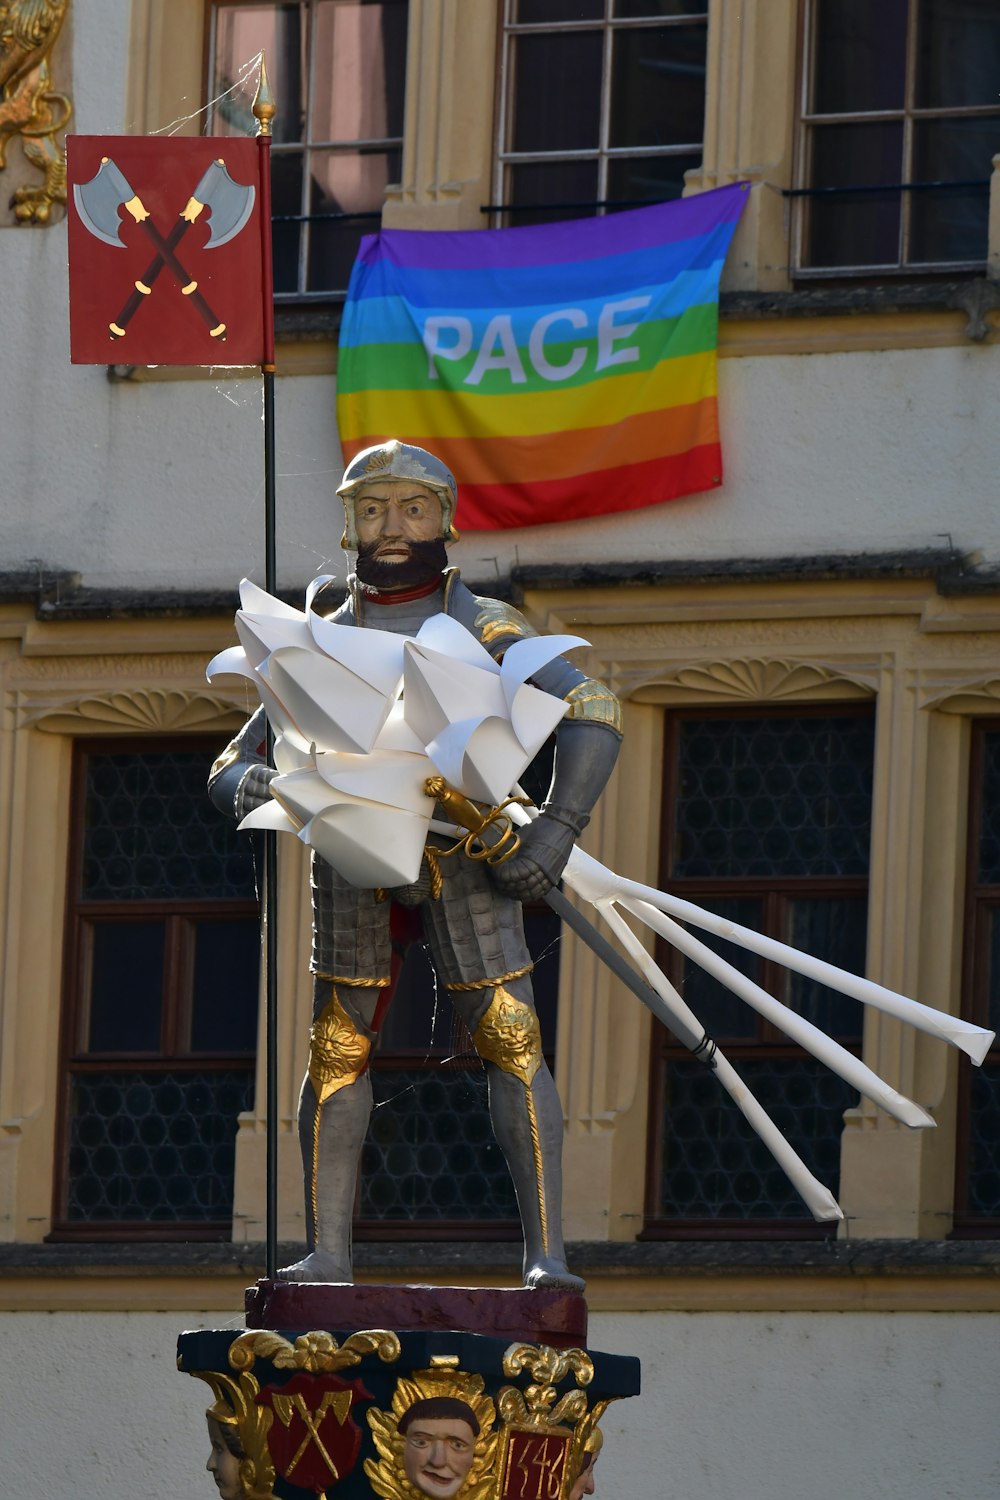 a statue of a person holding a flag